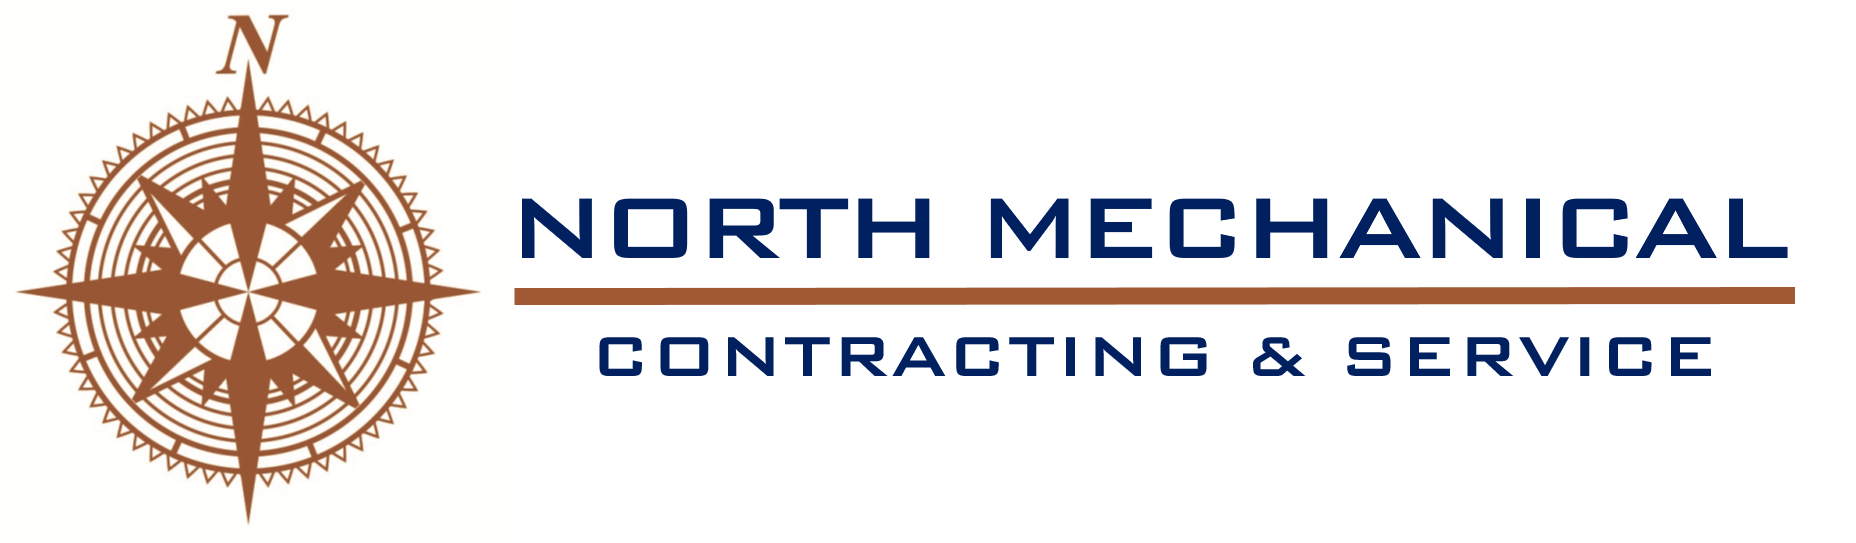 North Mechanical Contracting & Service